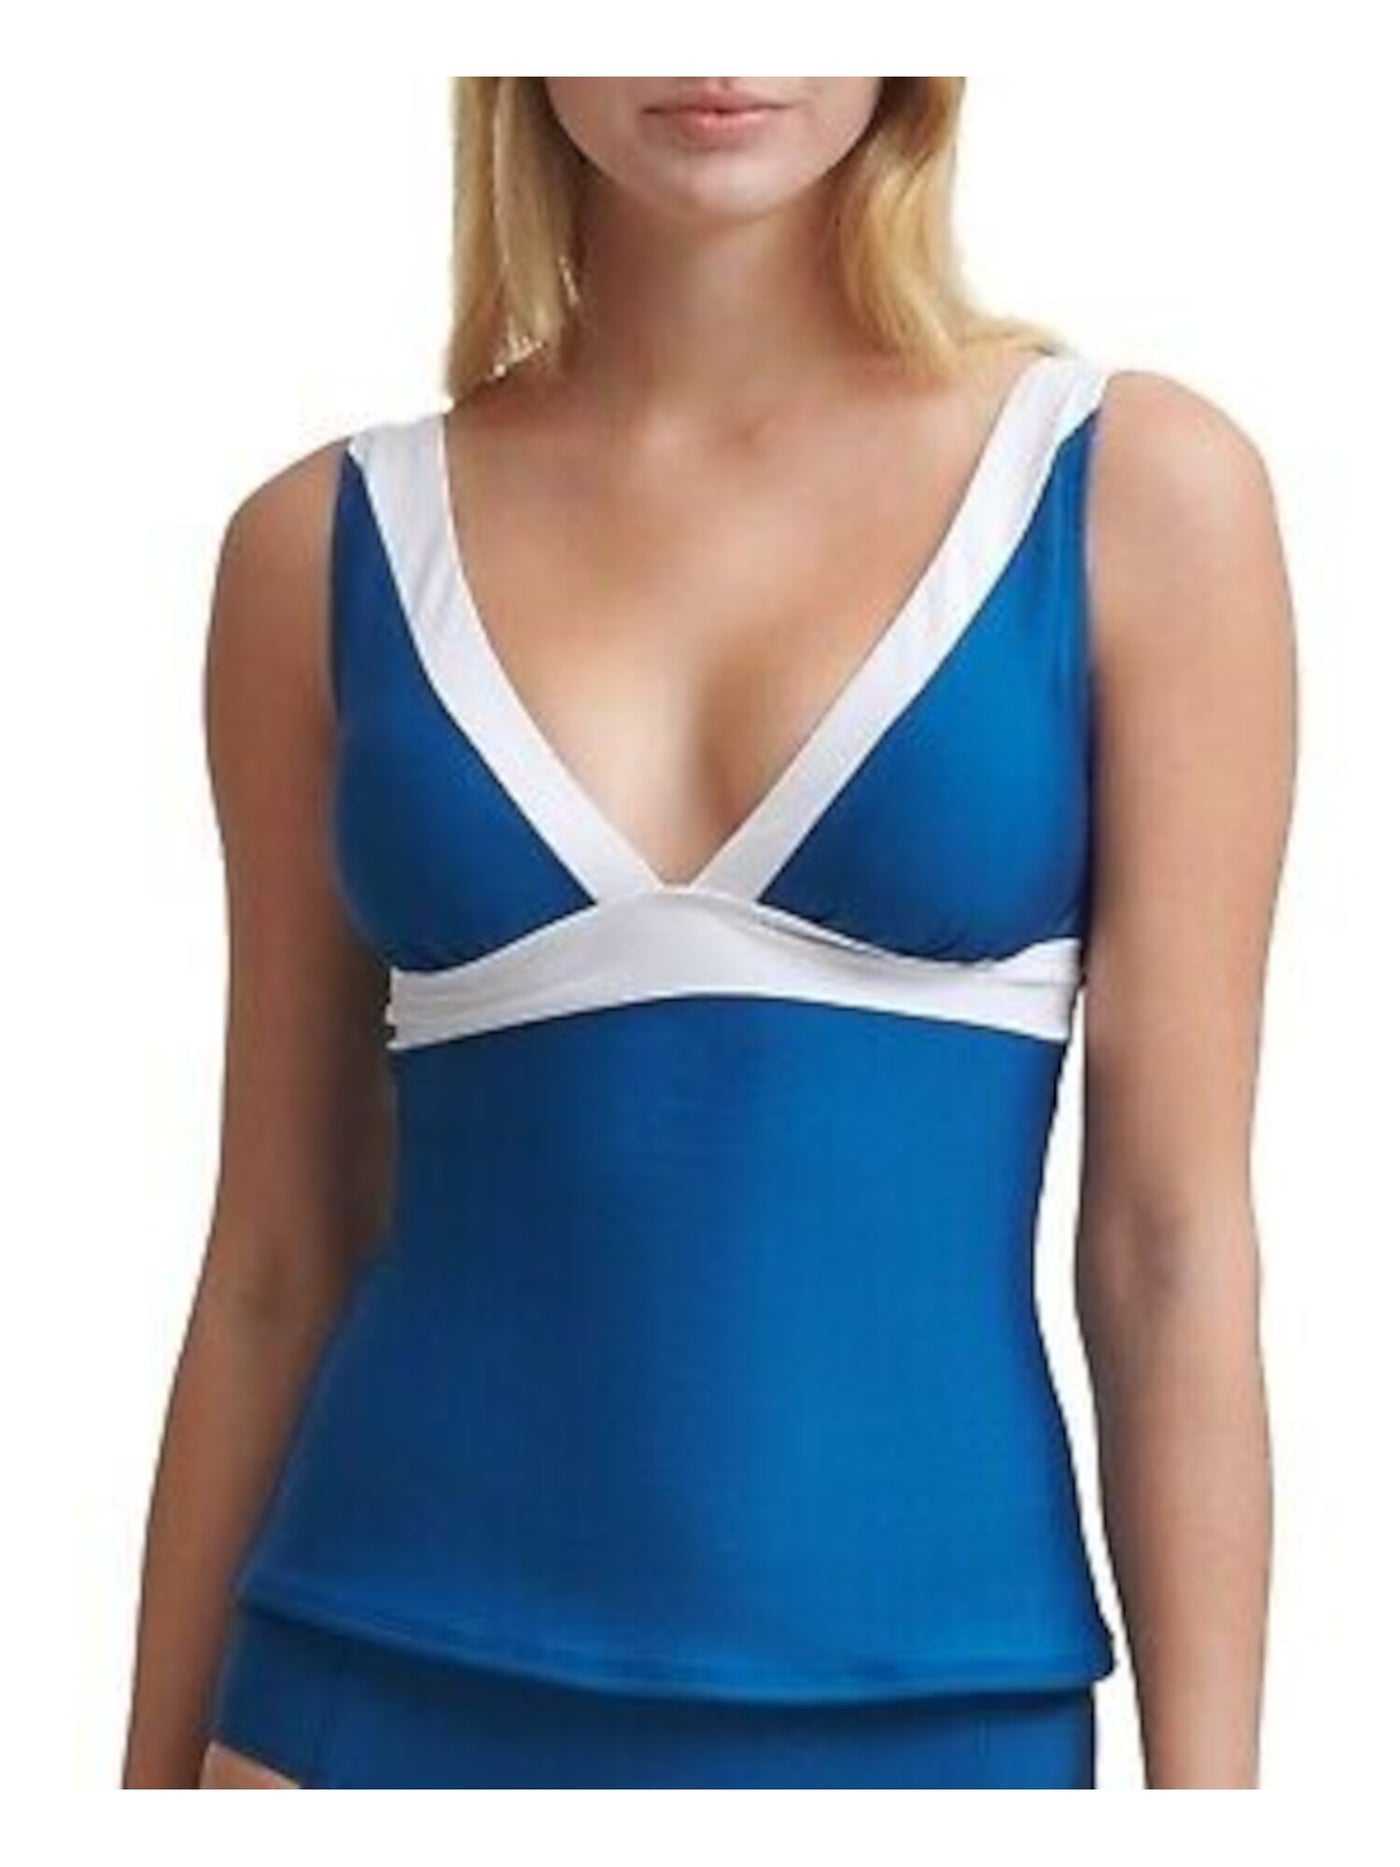 DKNY Women's Blue Color Block Removable Soft Cups Deep V Neck Adjustable Tankini Swimsuit Top M